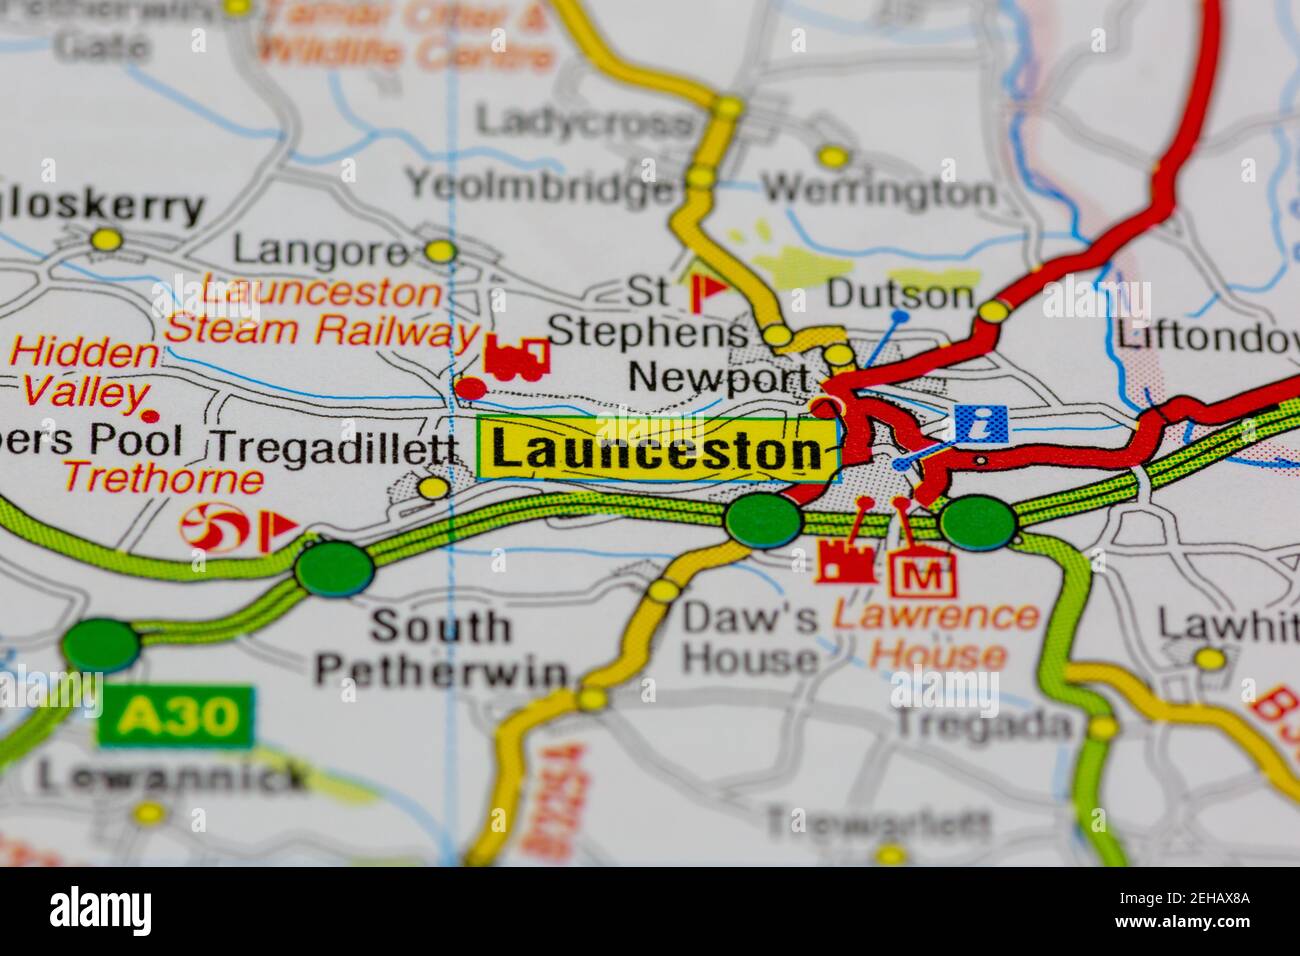 Launceston and surrounding areas shown on a road map or Geography map Stock Photo